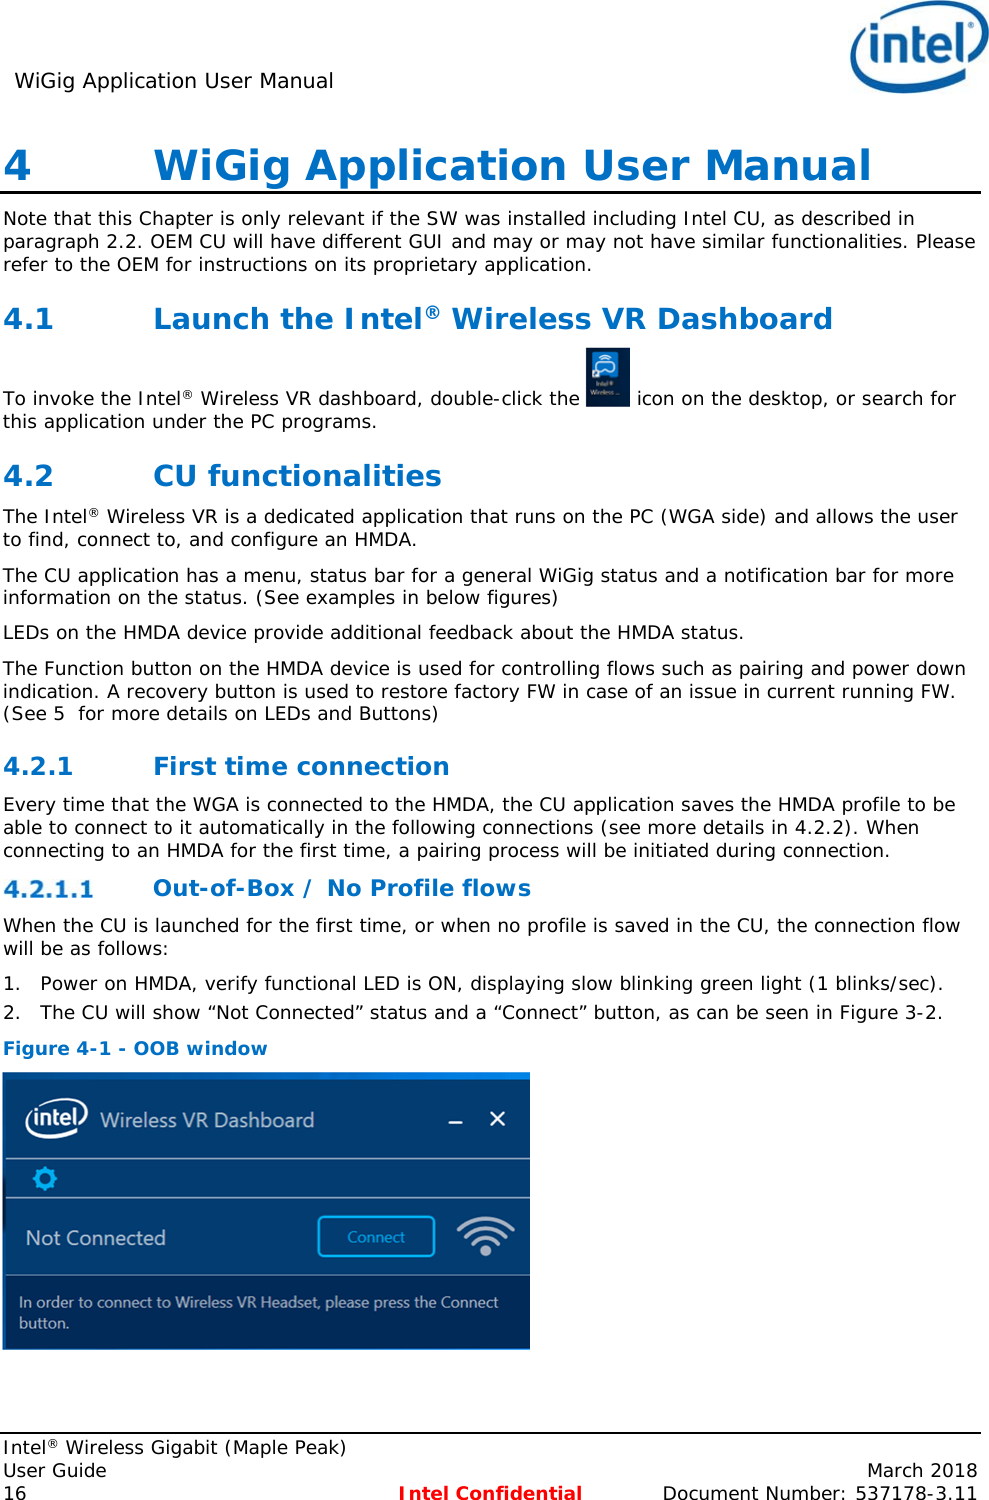 WiGig Application User Manual     Intel® Wireless Gigabit (Maple Peak) User Guide    March 2018 16 Intel Confidential  Document Number: 537178-3.11 4   WiGig Application User Manual Note that this Chapter is only relevant if the SW was installed including Intel CU, as described in paragraph 2.2. OEM CU will have different GUI and may or may not have similar functionalities. Please refer to the OEM for instructions on its proprietary application. 4.1 Launch the Intel® Wireless VR Dashboard To invoke the Intel® Wireless VR dashboard, double-click the   icon on the desktop, or search for this application under the PC programs. 4.2 CU functionalities The Intel® Wireless VR is a dedicated application that runs on the PC (WGA side) and allows the user to find, connect to, and configure an HMDA. The CU application has a menu, status bar for a general WiGig status and a notification bar for more information on the status. (See examples in below figures) LEDs on the HMDA device provide additional feedback about the HMDA status. The Function button on the HMDA device is used for controlling flows such as pairing and power down indication. A recovery button is used to restore factory FW in case of an issue in current running FW. (See 5  for more details on LEDs and Buttons) 4.2.1 First time connection Every time that the WGA is connected to the HMDA, the CU application saves the HMDA profile to be able to connect to it automatically in the following connections (see more details in 4.2.2). When connecting to an HMDA for the first time, a pairing process will be initiated during connection.  Out-of-Box / No Profile flows When the CU is launched for the first time, or when no profile is saved in the CU, the connection flow will be as follows:  1. Power on HMDA, verify functional LED is ON, displaying slow blinking green light (1 blinks/sec). 2. The CU will show “Not Connected” status and a “Connect” button, as can be seen in Figure 3-2. Figure 4-1 - OOB window  